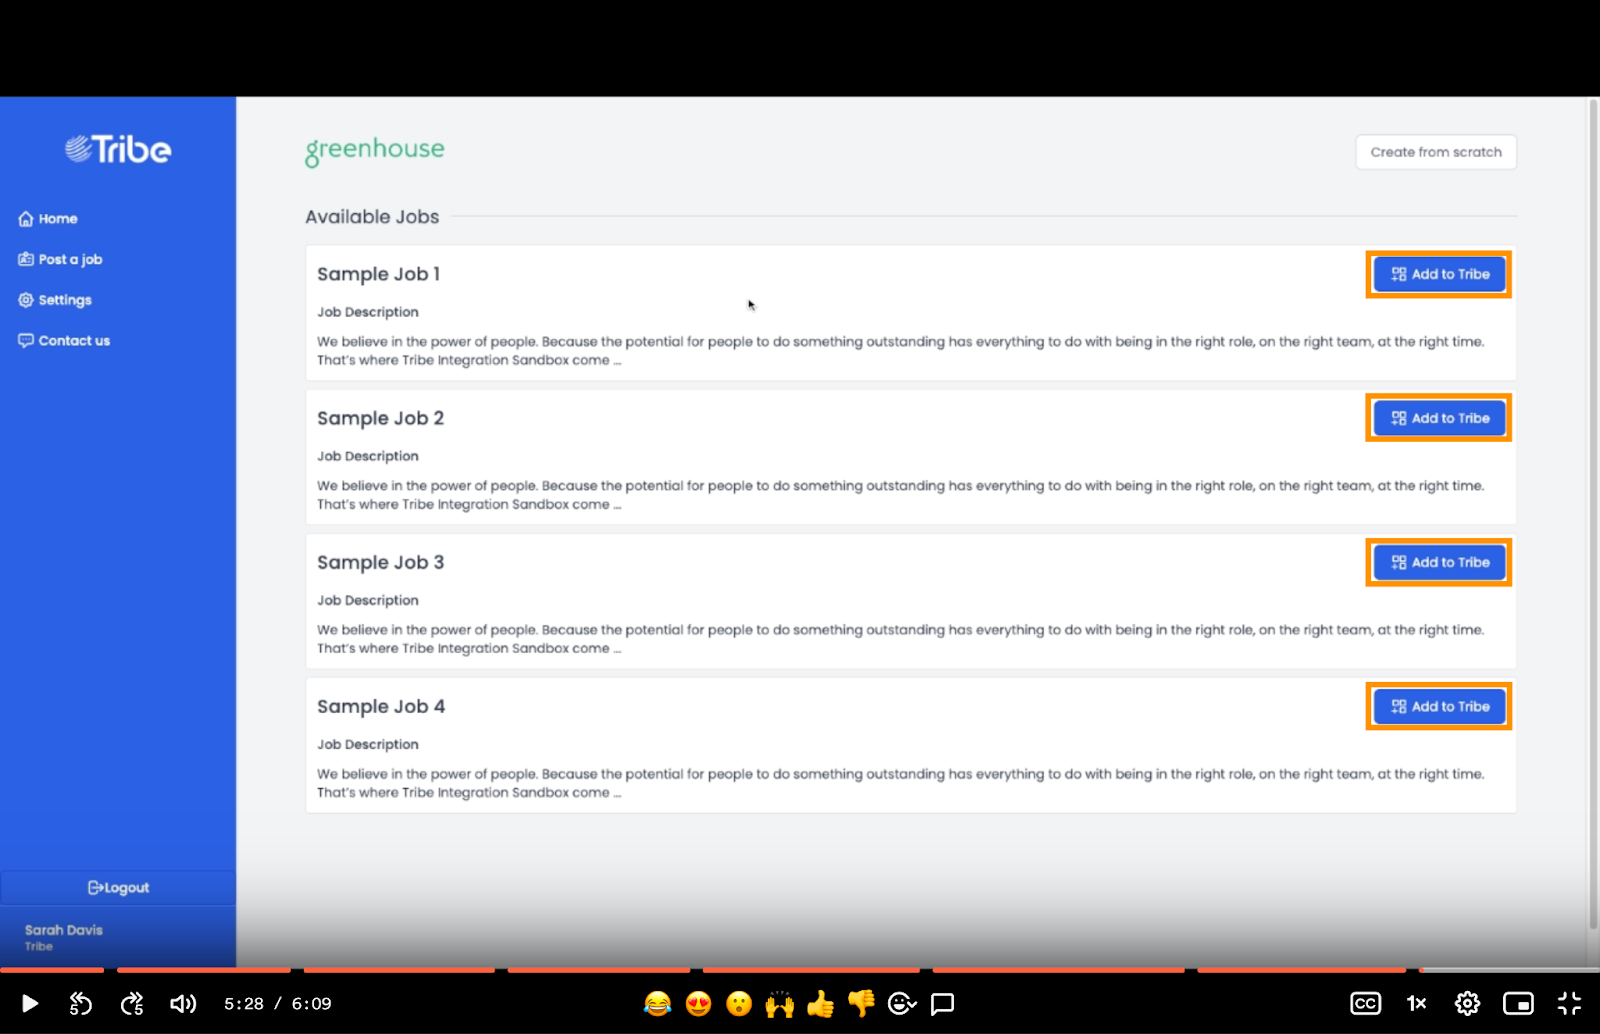 Tribe platform shows shows sample jobs that can be imported to Tribe